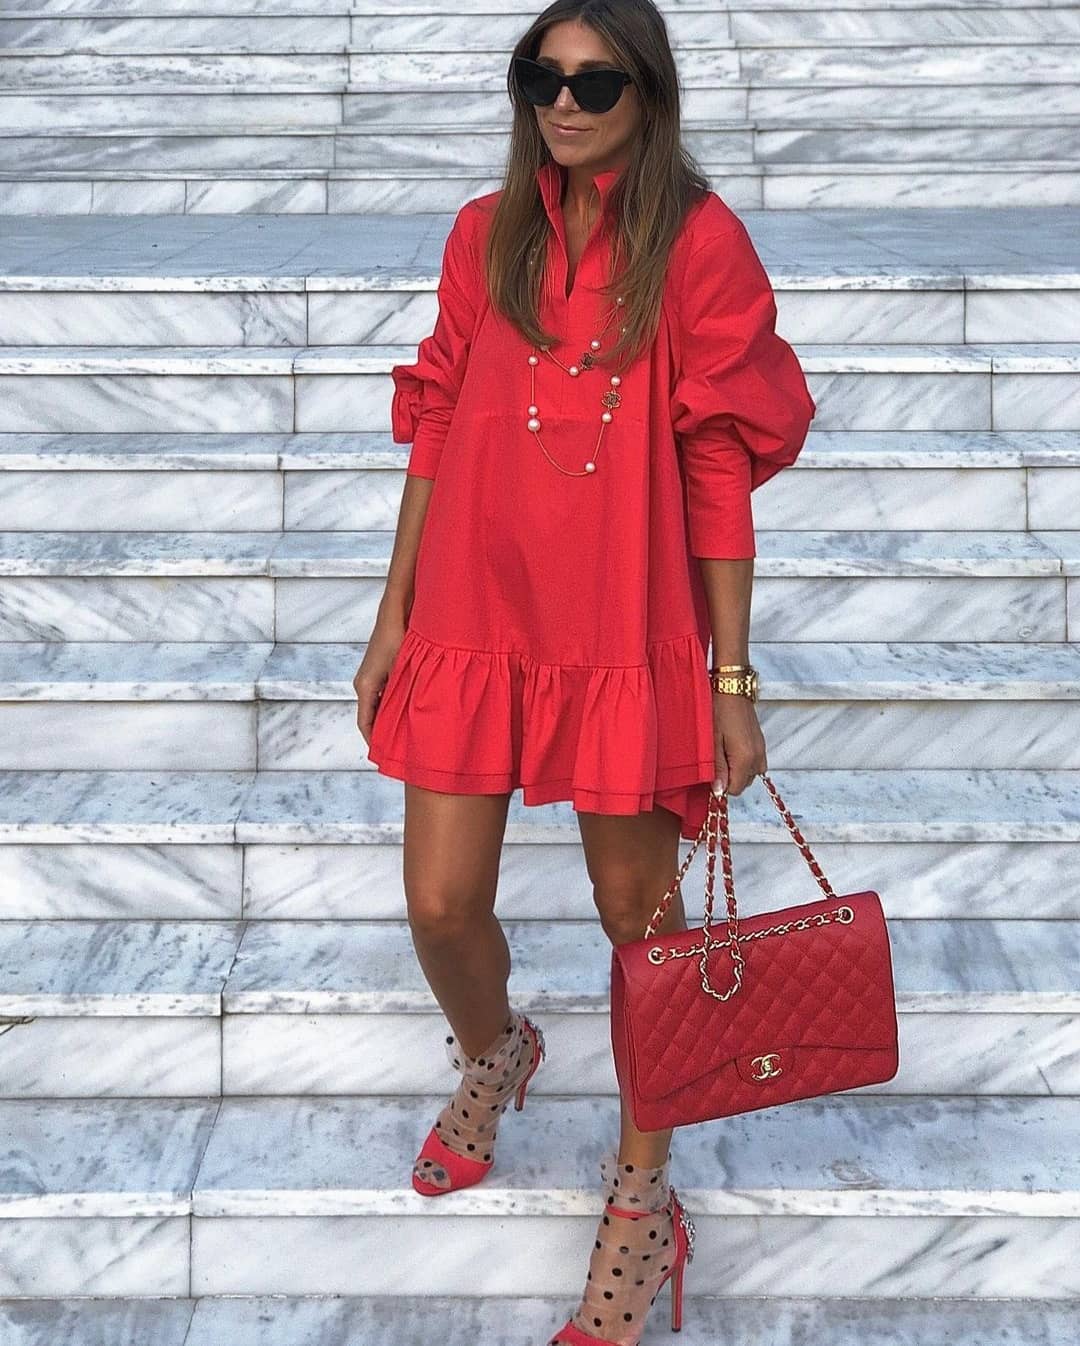 How to dress in red - 27 hottest red summer outfits for women | Melody ...